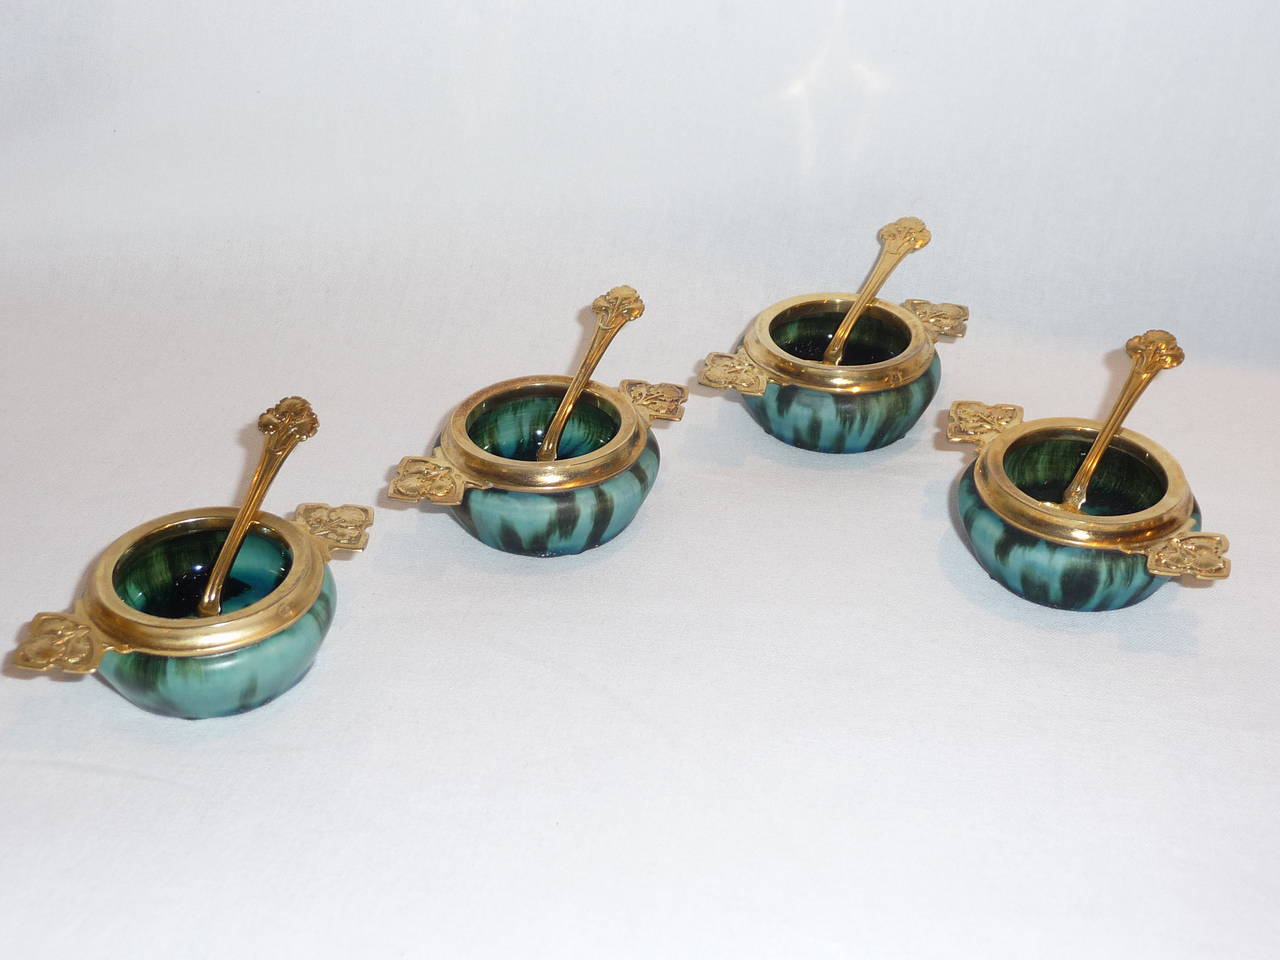 Eugene Baudin,
Alphonse Debain.
A set of six Art Nouveau salt cellars with four spoons; in its fitted box,
stoneware and vermeil.